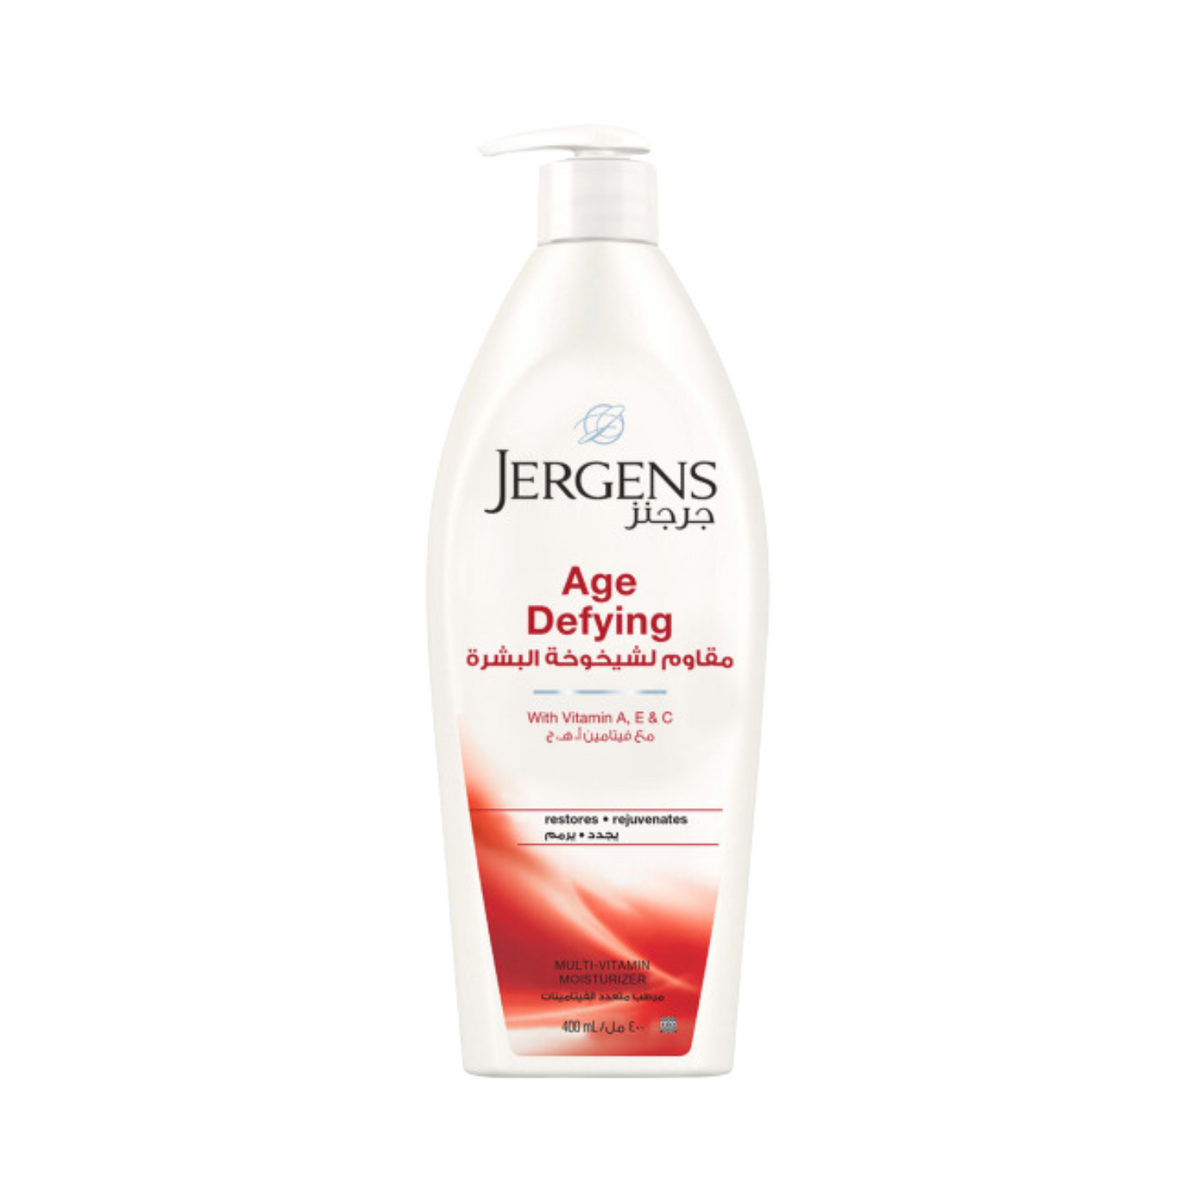 jergens-age-defying-with-vitamin-a-e-c-400ml